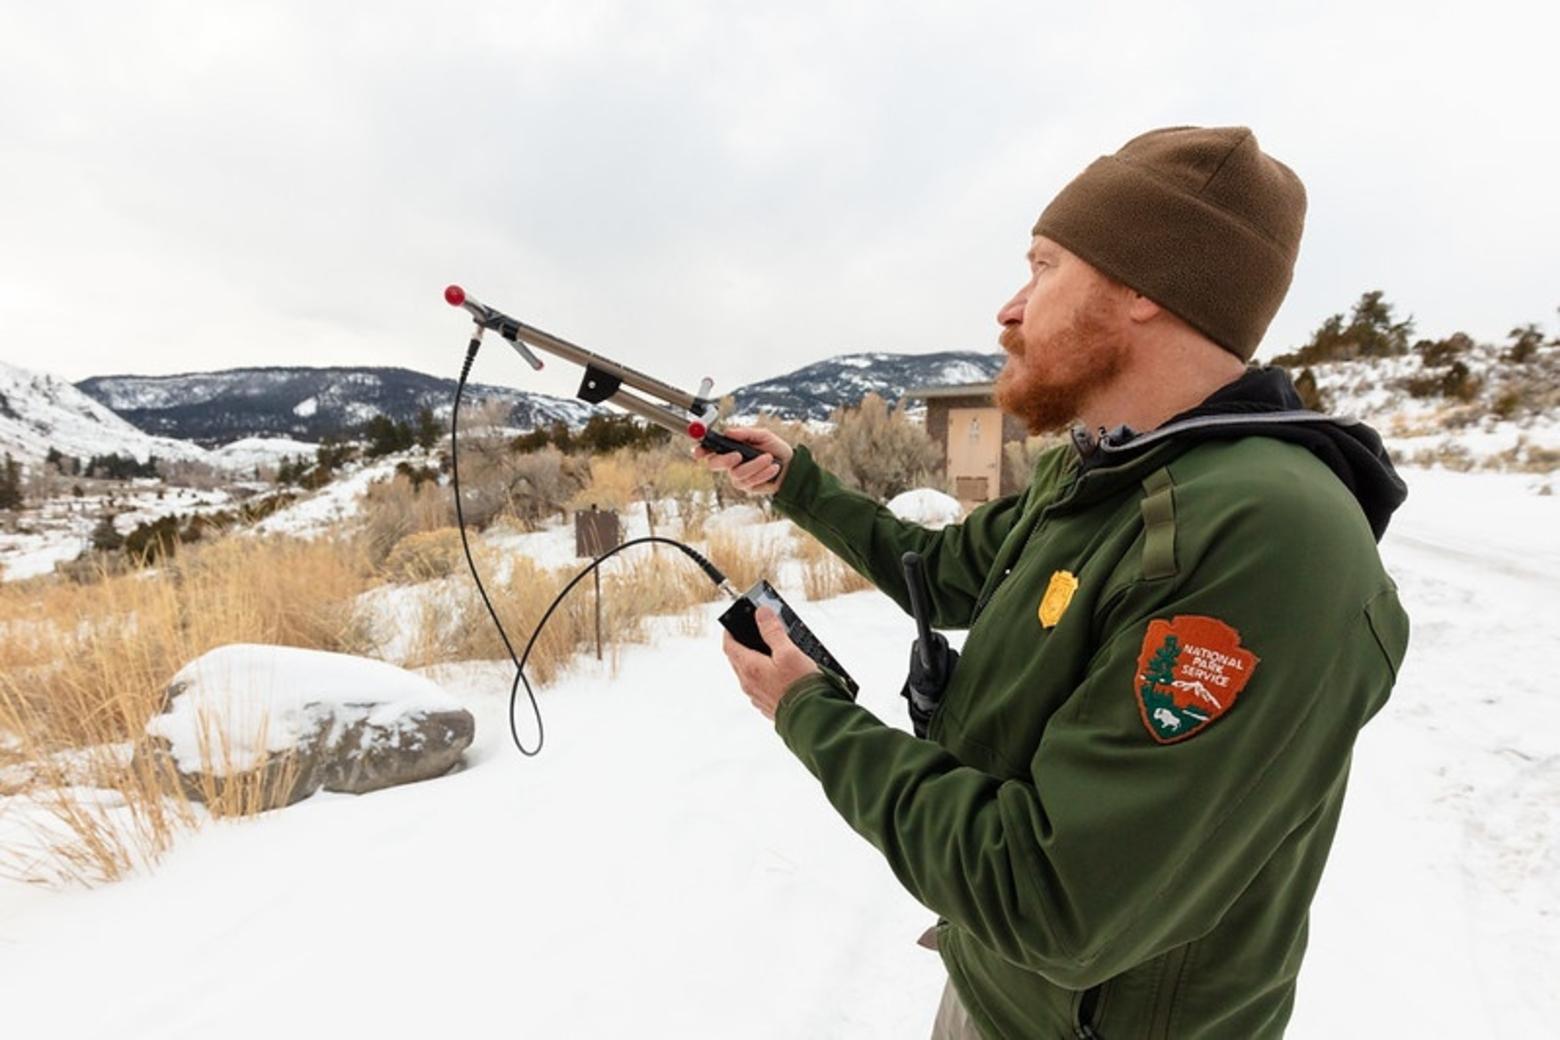 Dan Stahler, recently named lead biologist for the Yellowstone Wolf Project, uses telemetry on more than wolves. Here, he utilizes the collar-tracking technology to track cougars. Phogto by Jacob W. Frank/NPS